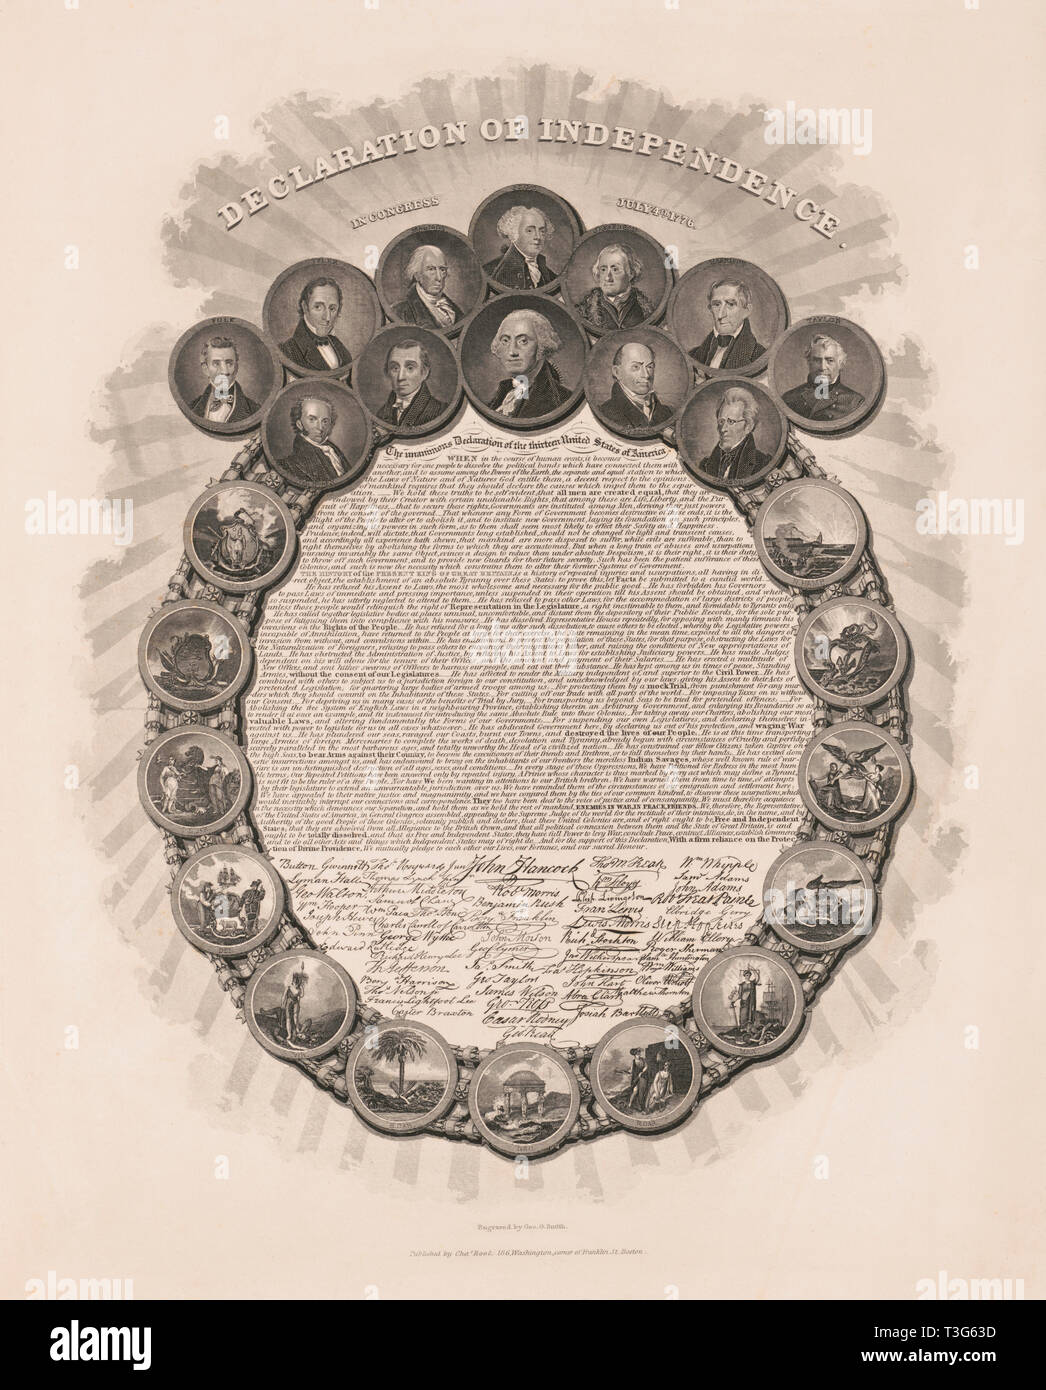 Declaration of Independence, in Congress July 4th 1776, Text and Signatures within Wreath of Portraits of First Twelve U.S. Presidents and Scenes Representing Thirteen Colonies, Engraved by Geo. G. Smith, Published by Charles Root, Boston, 1850 Stock Photo